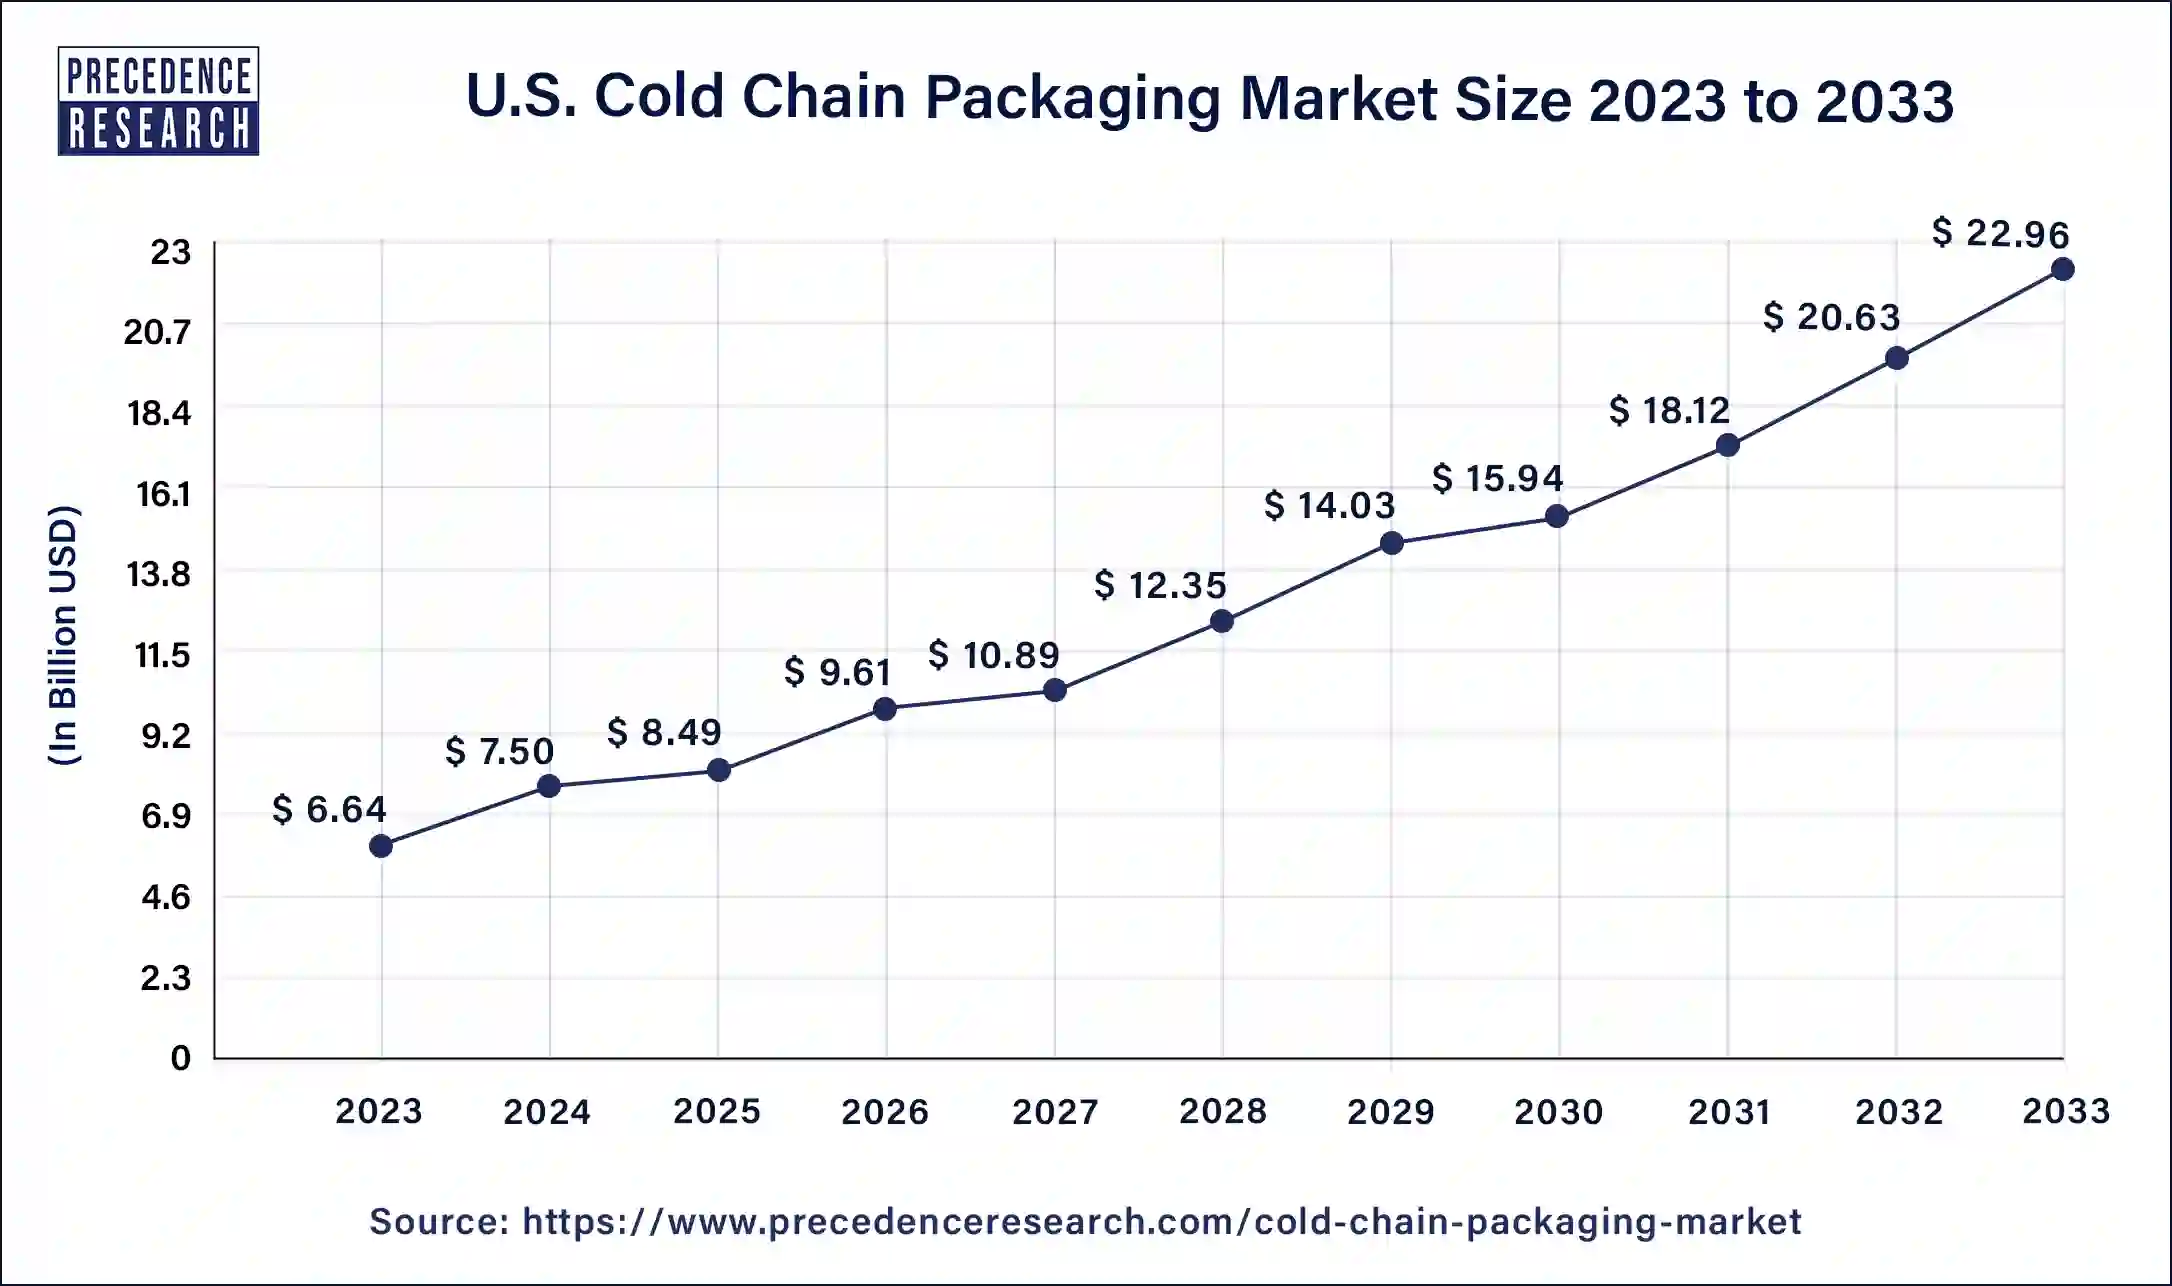 U.S. Cold Chain Packaging Market Size 2024 To 2033